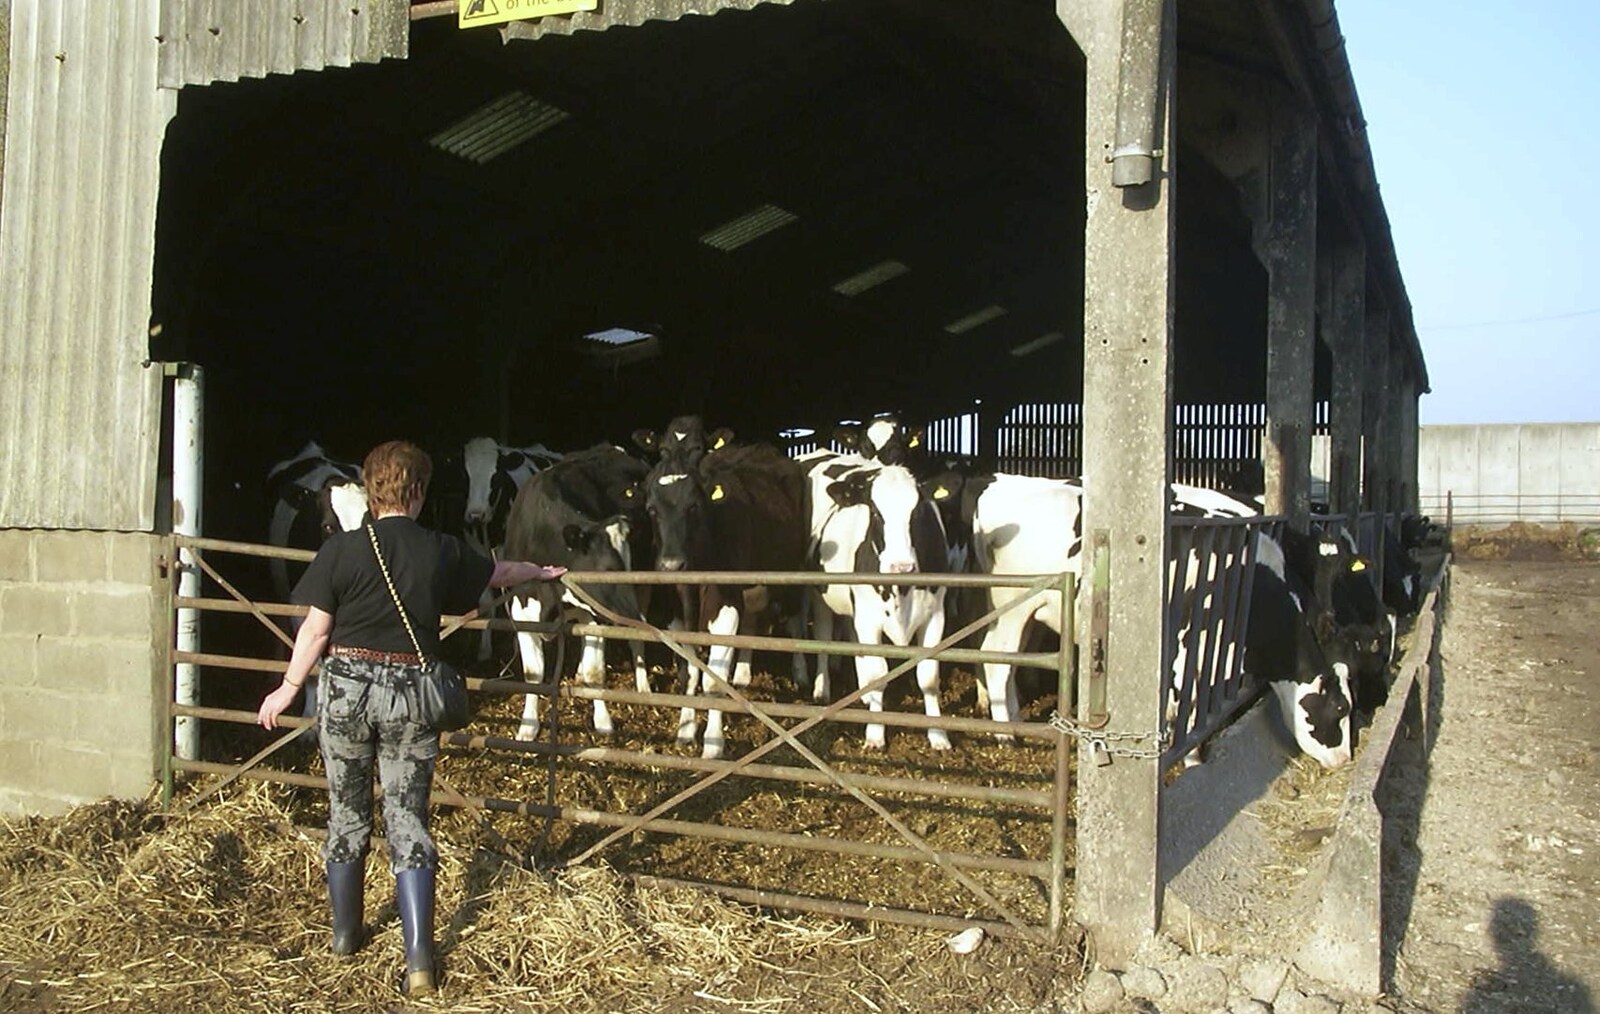 Carolyn on Sunday, Wymondham, Norfolk - 23rd March 2003: Jenny goes over to stir the cows up